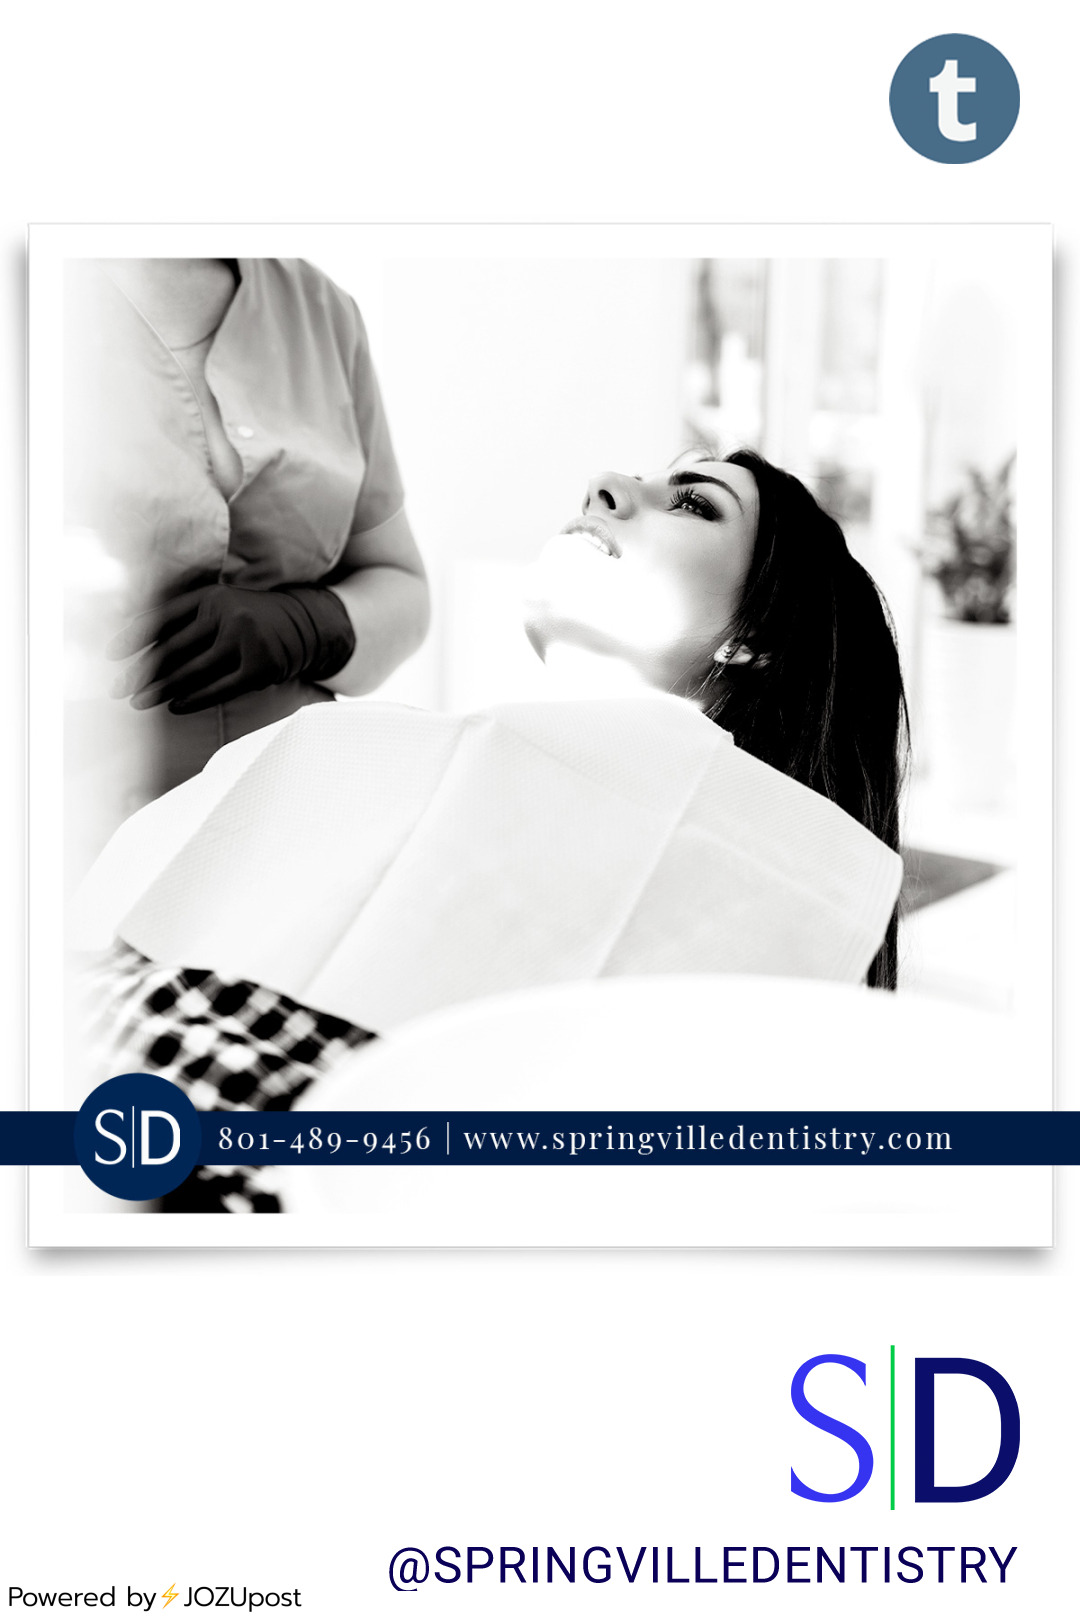 Discover the benefits of sedation dentistry with #SpringvilleDentistry! Our licensed experts in #SedationDentistry ensure a stress-free experience. Stay awake or deeply relaxed, free from pain during procedures. Choose comfort and conquer dental...